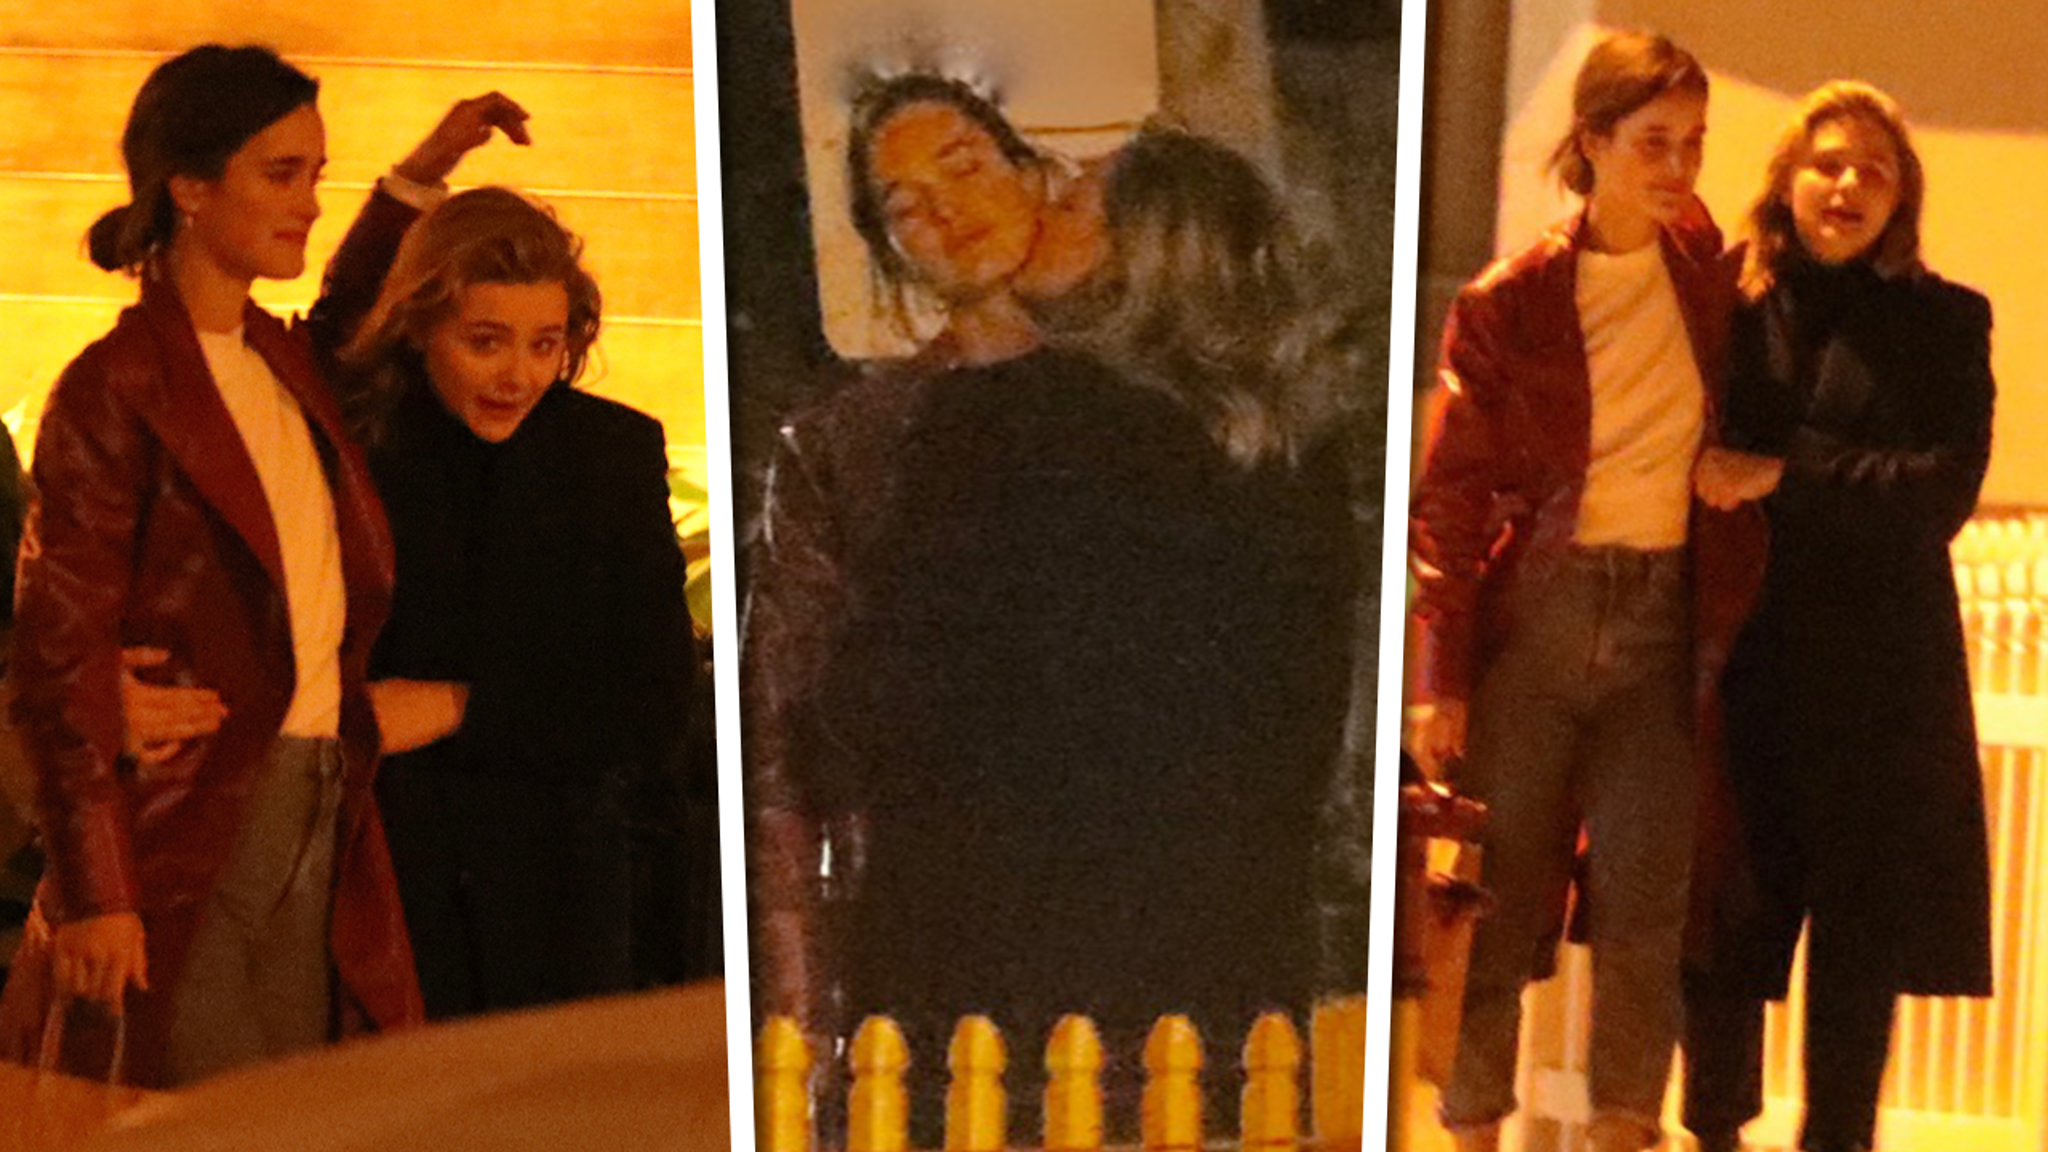 Chloe Grace Moretz Has Dinner and Makeout Session with Model Kate Harrison